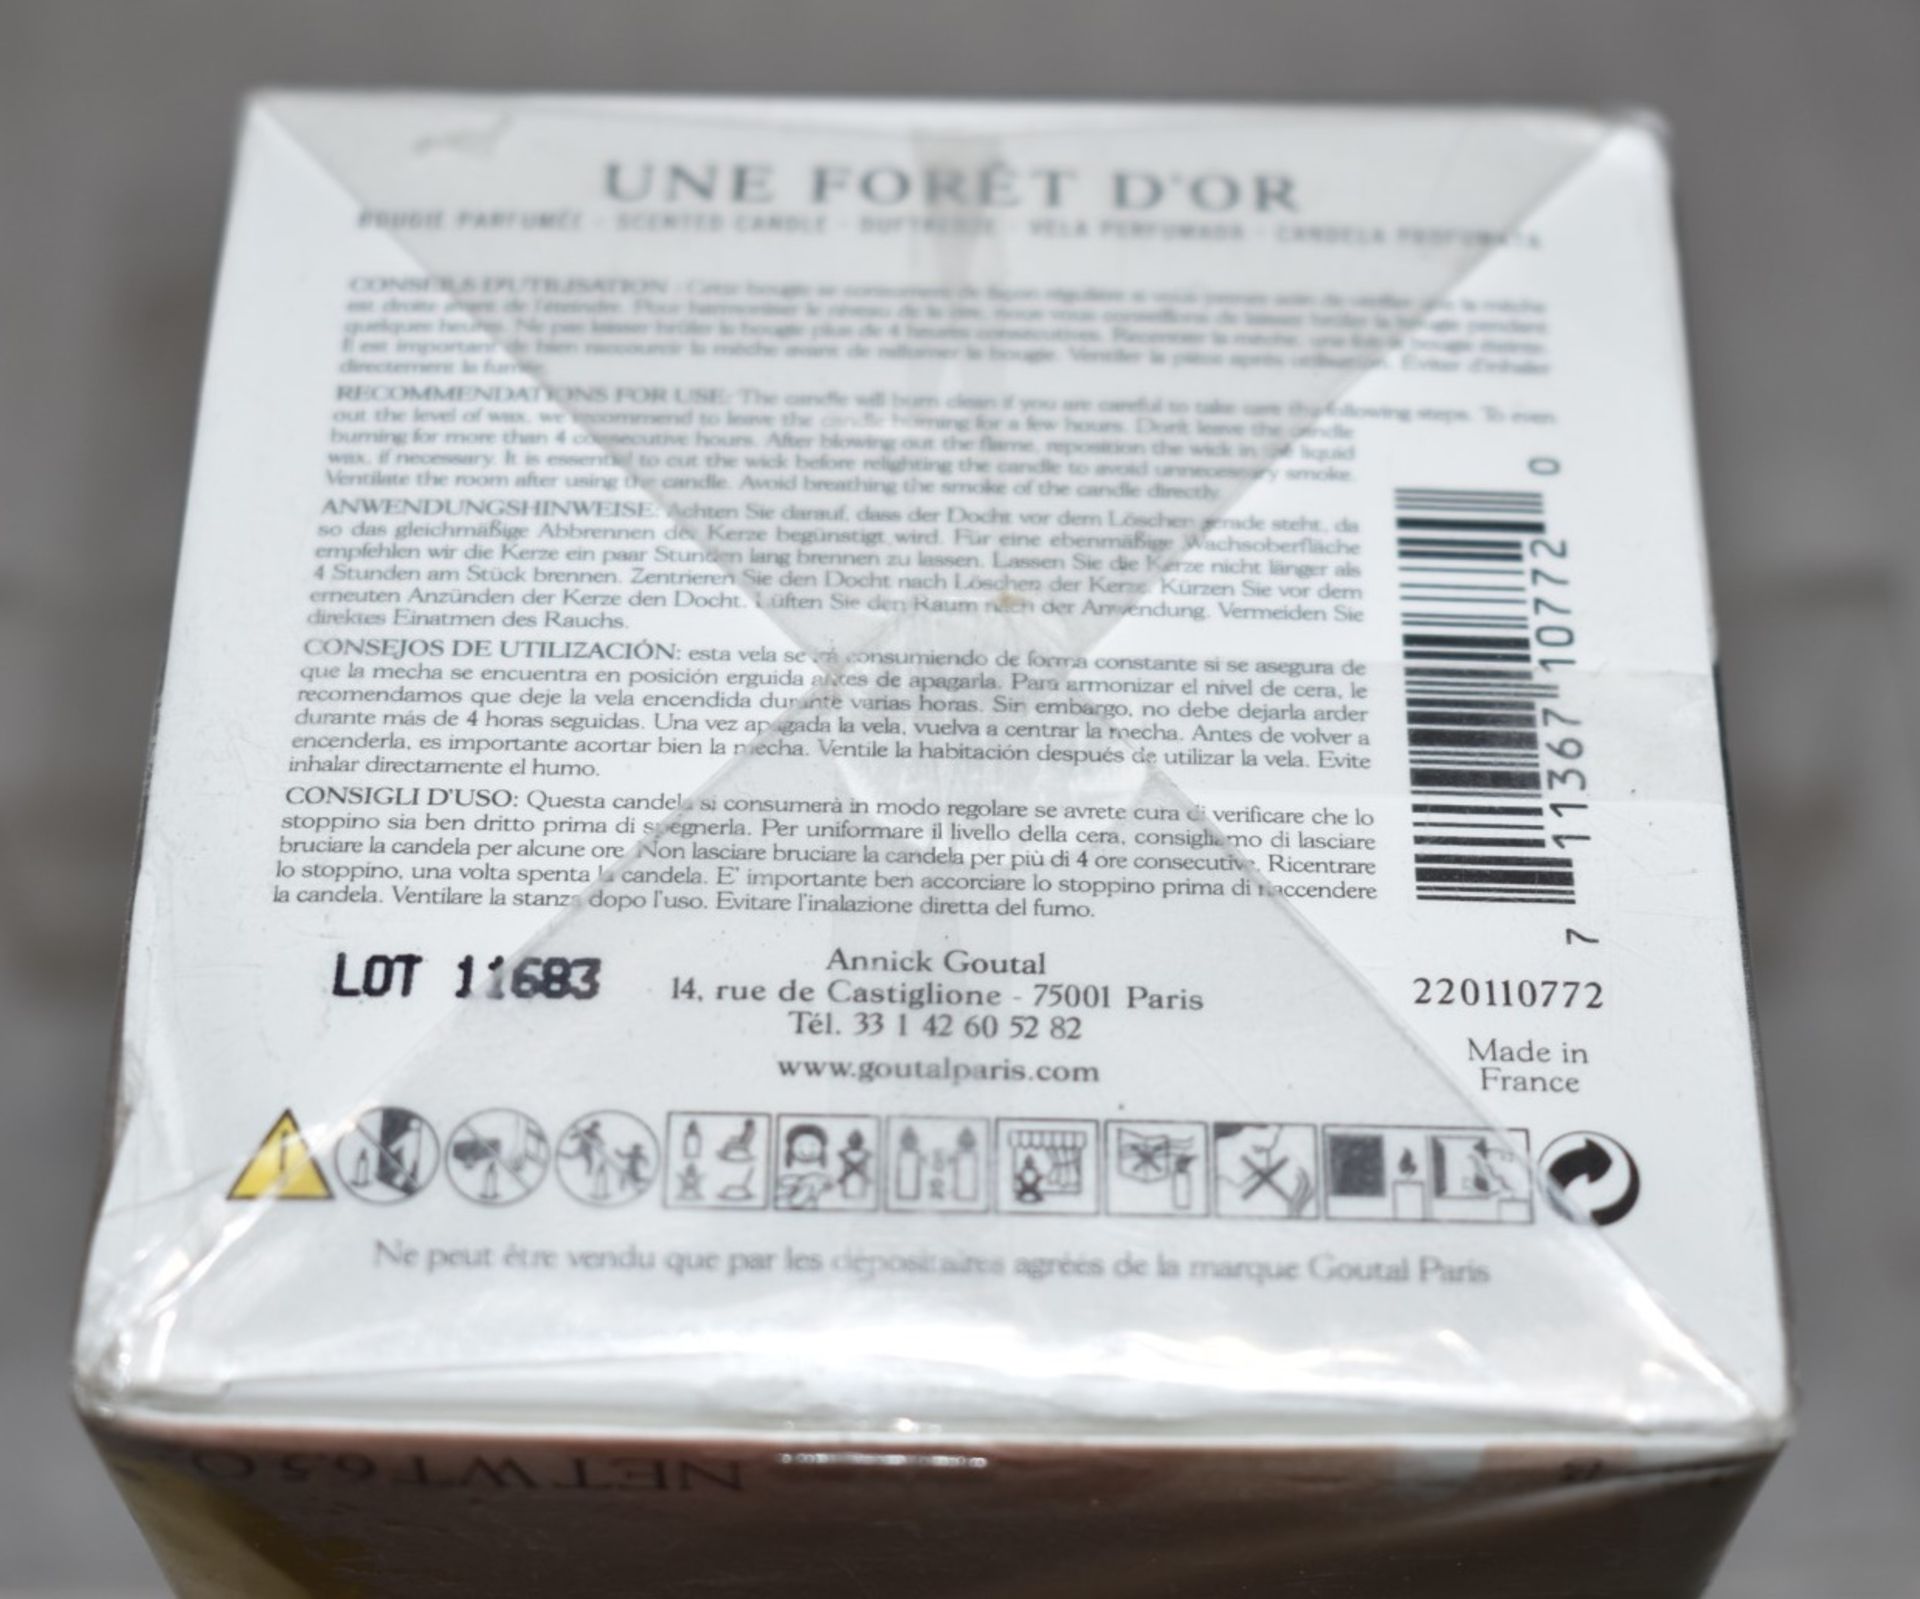 1 x GOUTAL PARIS Une Forêt d'Or Luxury Scented Candle (185g) - Sealed/Boxed - Original Price £57.00 - Image 3 of 4